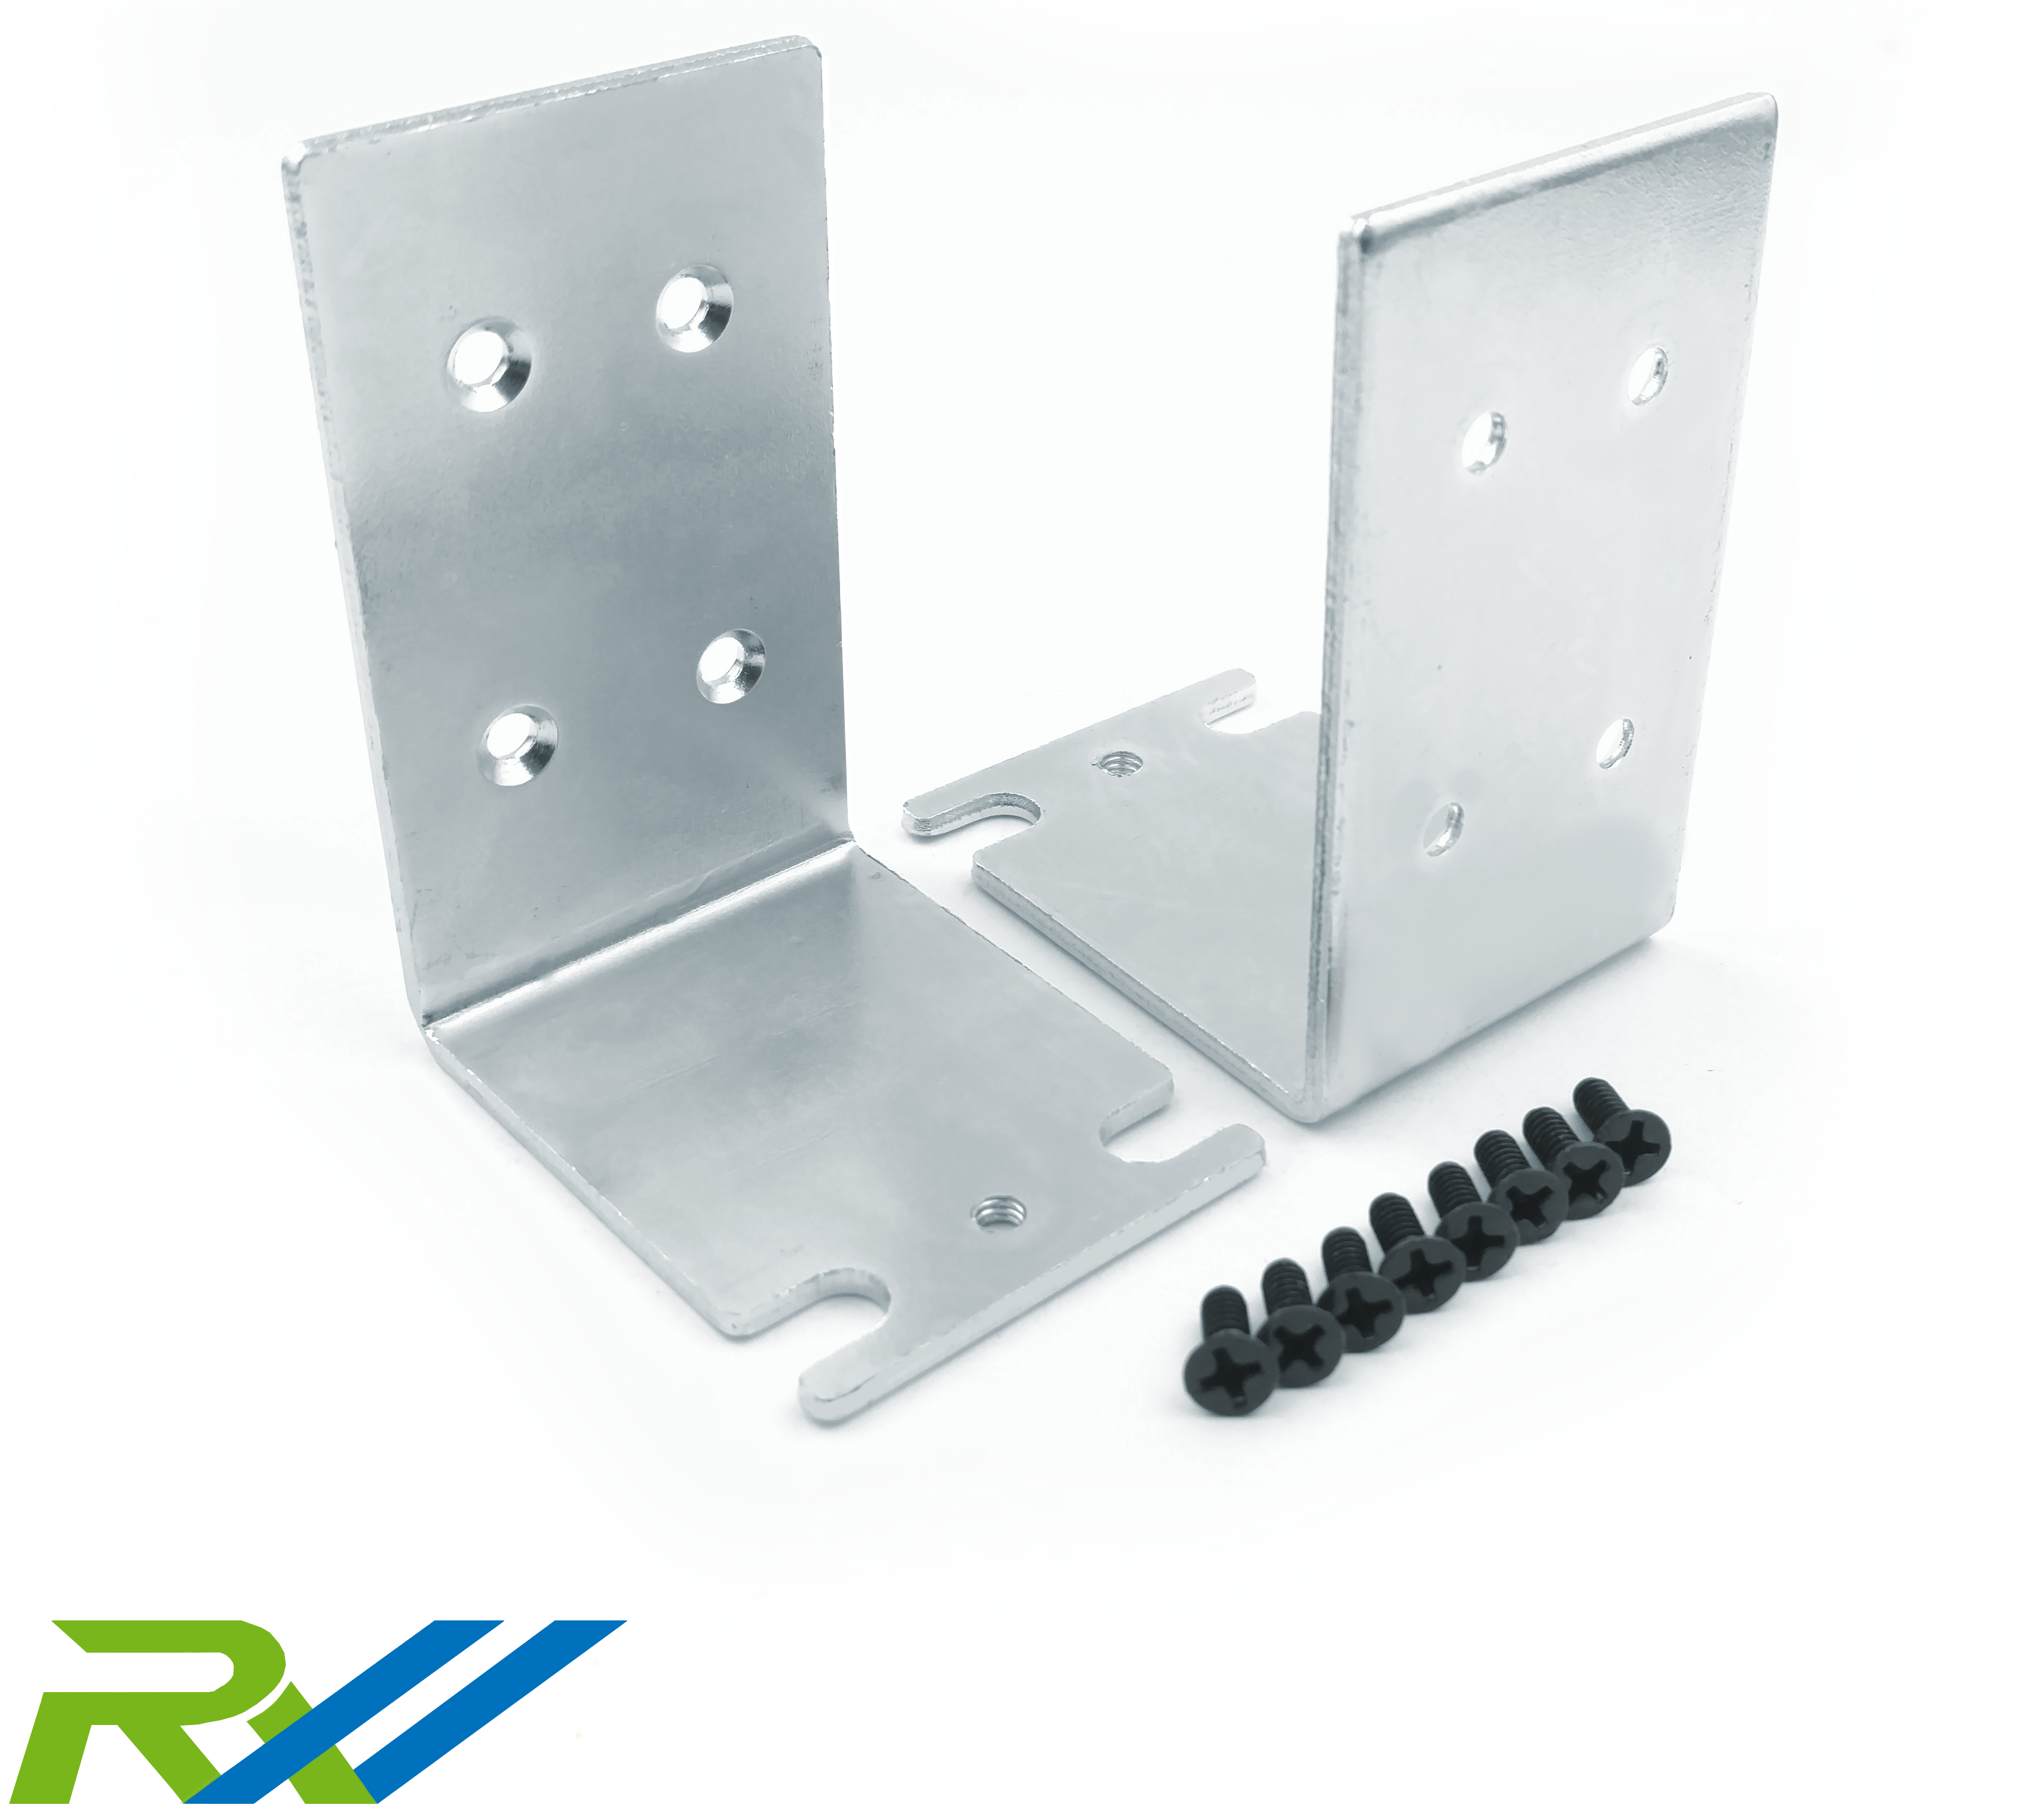 19" Cisco Rack Mount Kit for Cisco 4320 Series Routers - Click Image to Close